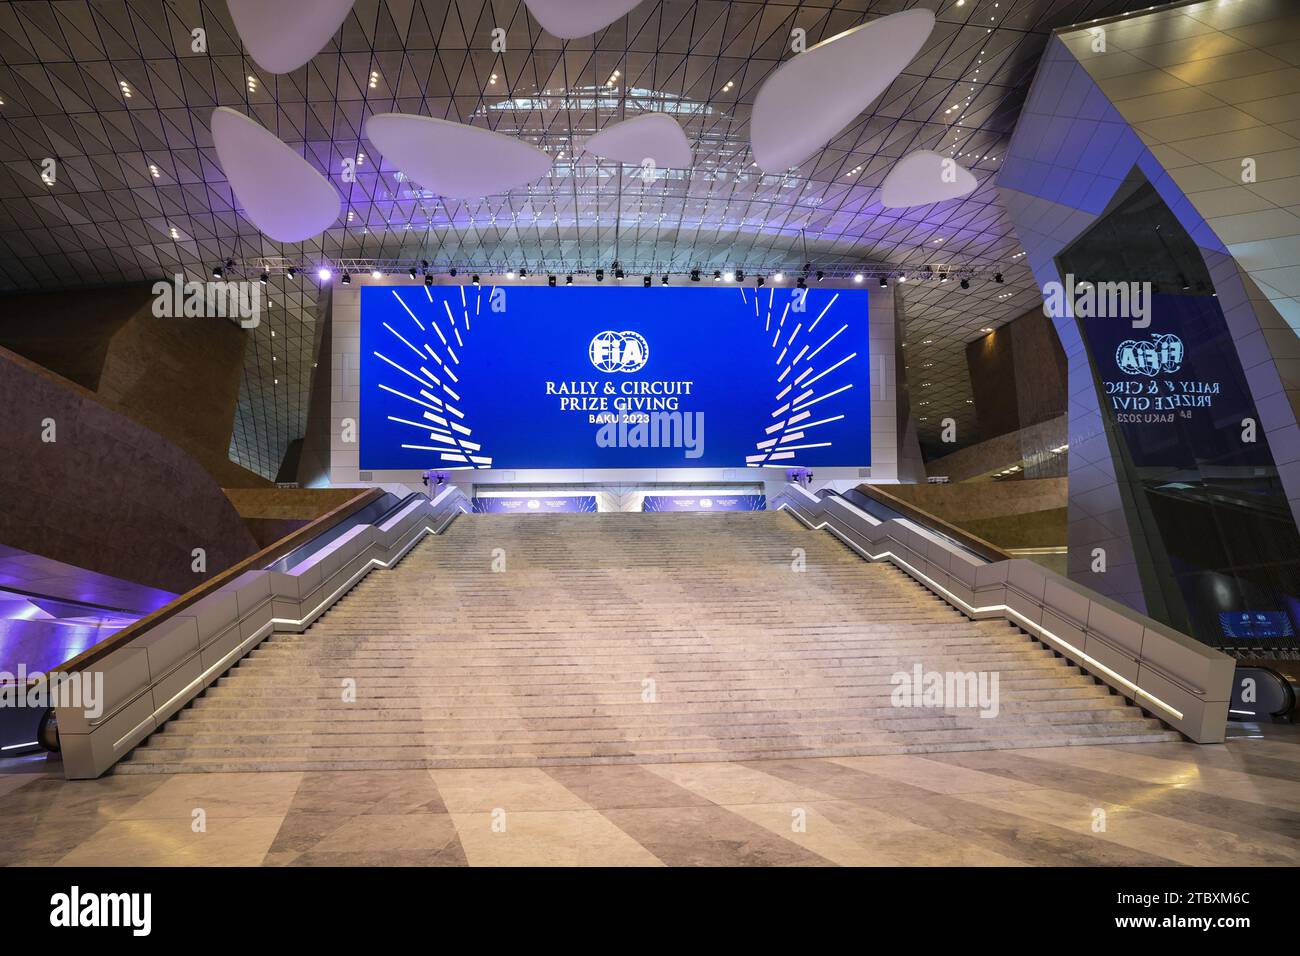 Illustration convention center during the 2023 FIA Rally & Circuit Prize Giving Ceremony in Baky on December 9, 2023 at Baku Convention Center in Baku, Azerbaijan Stock Photo